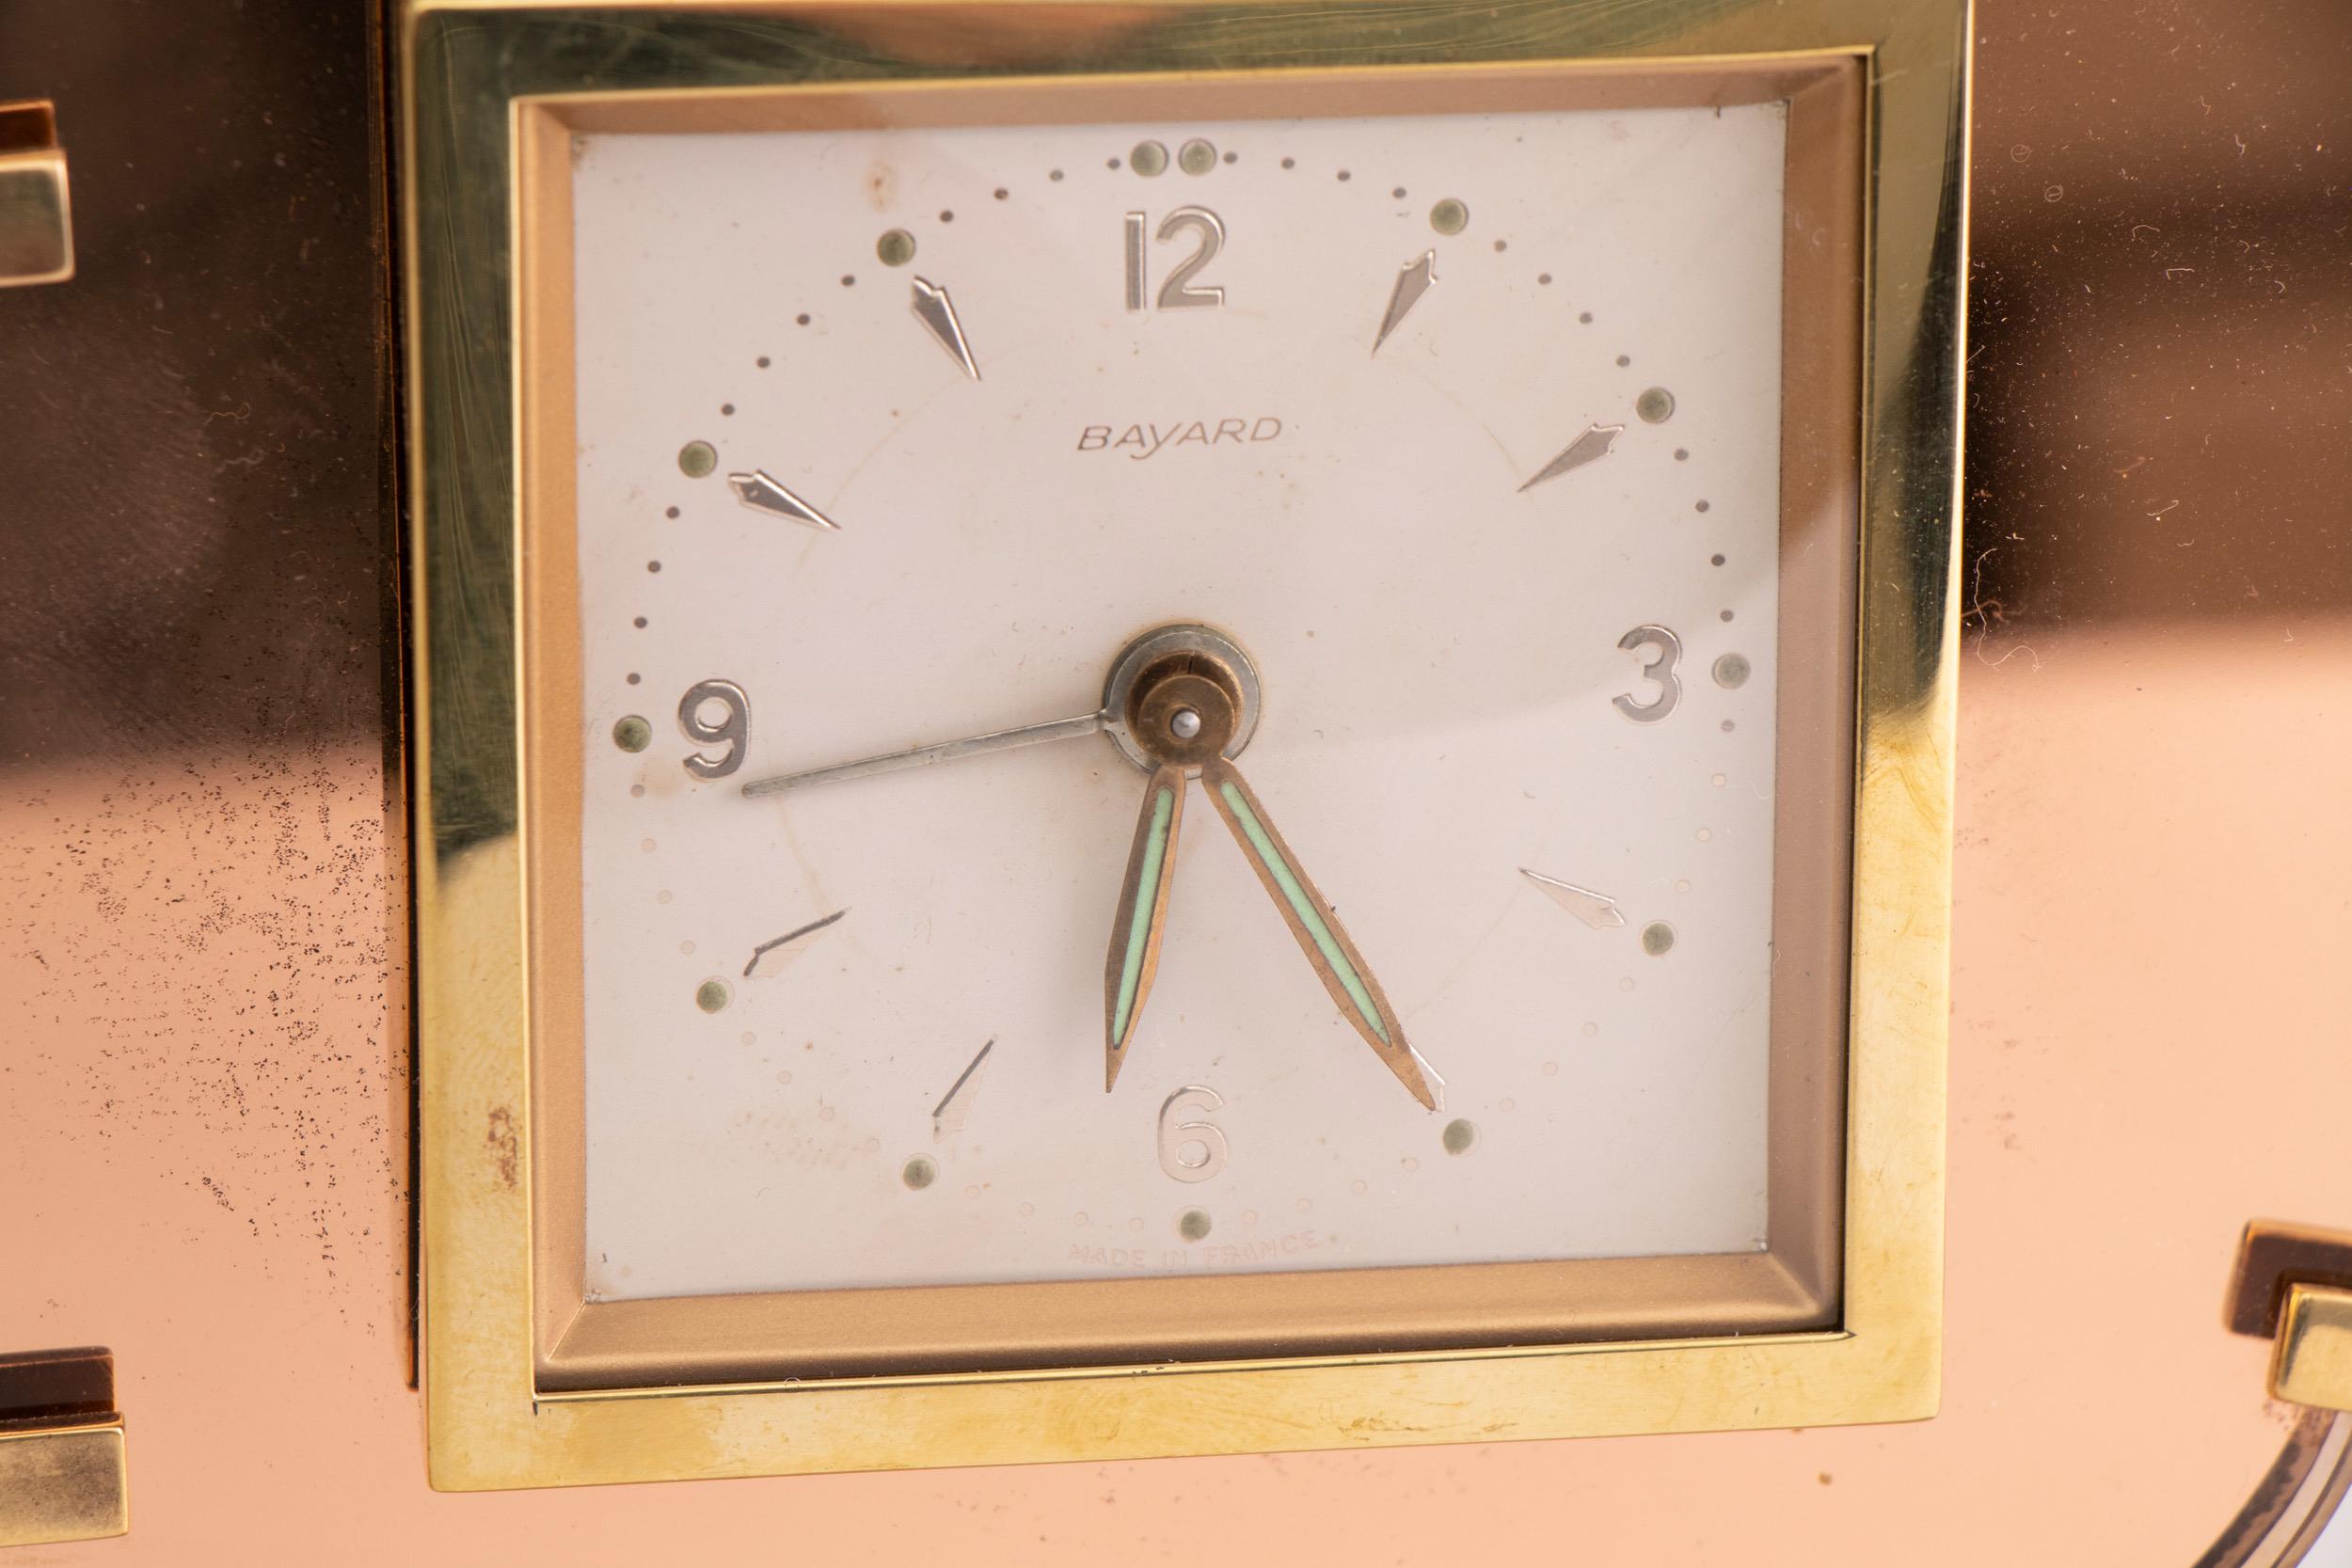 20th Century French Art Deco Clock with Peach Mirrored Glass by Bayard